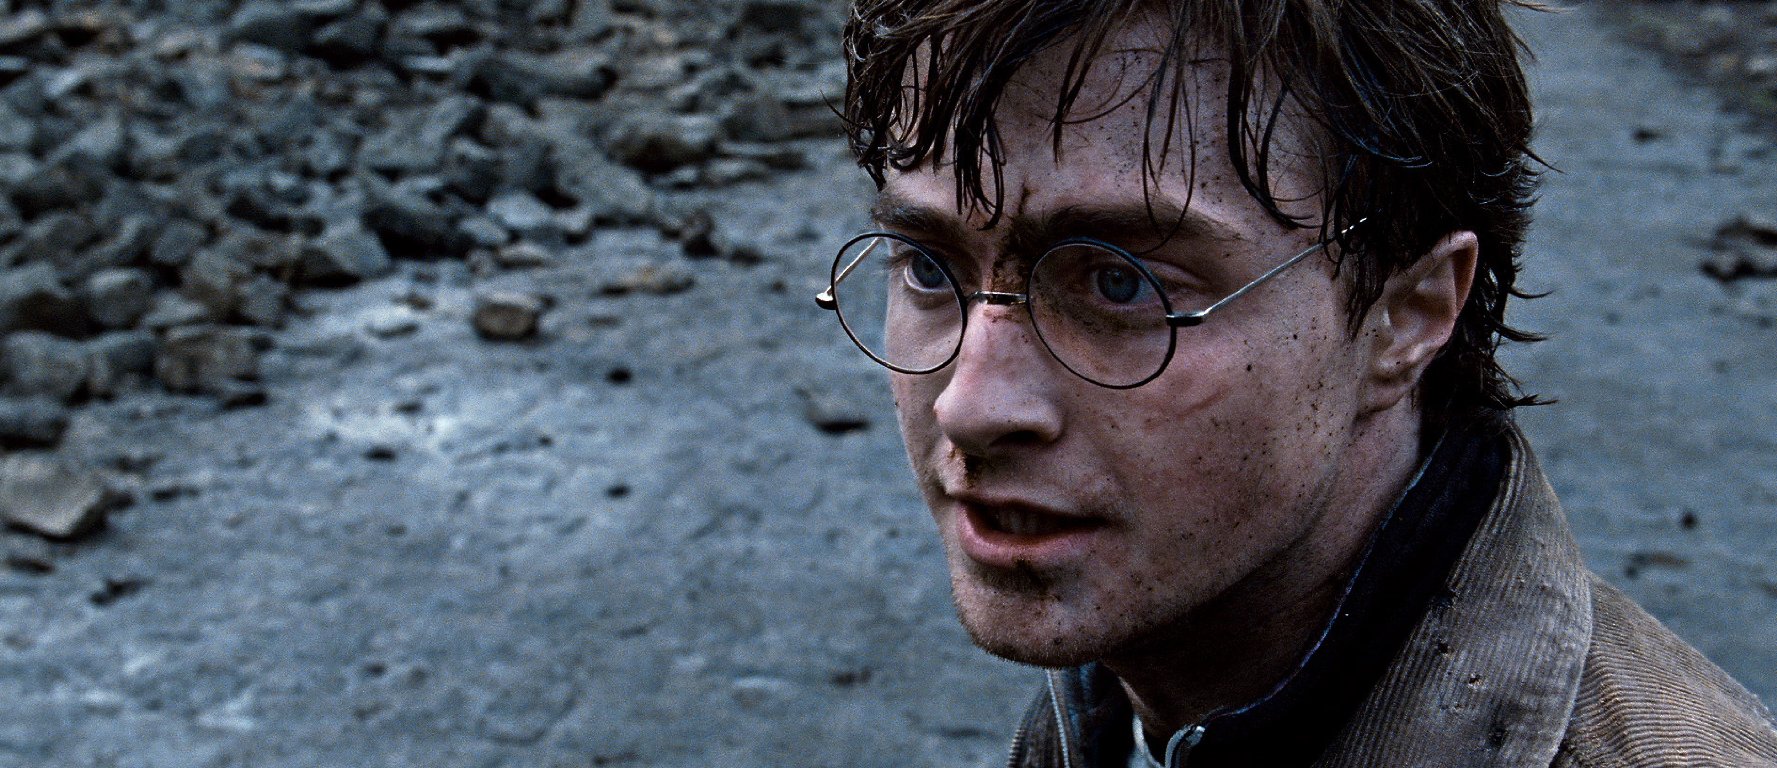 Daniel Radcliffe in Harry Potter and the Deathly Hallows - Part 2 (2011)